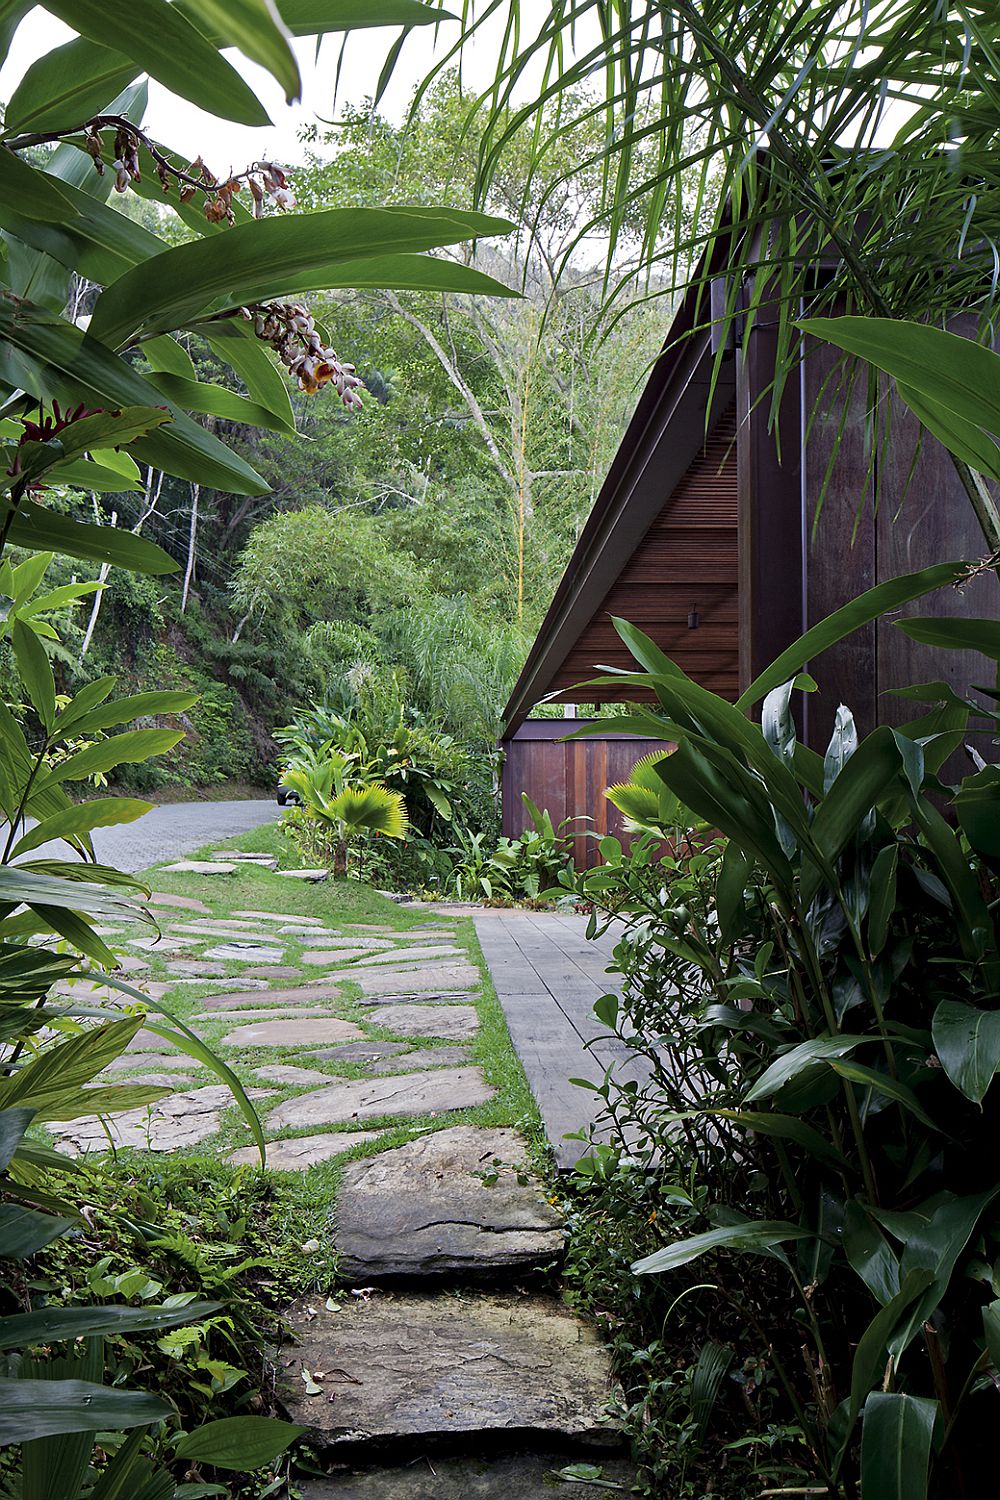 Entrance to the private house is concealed by natural greenery